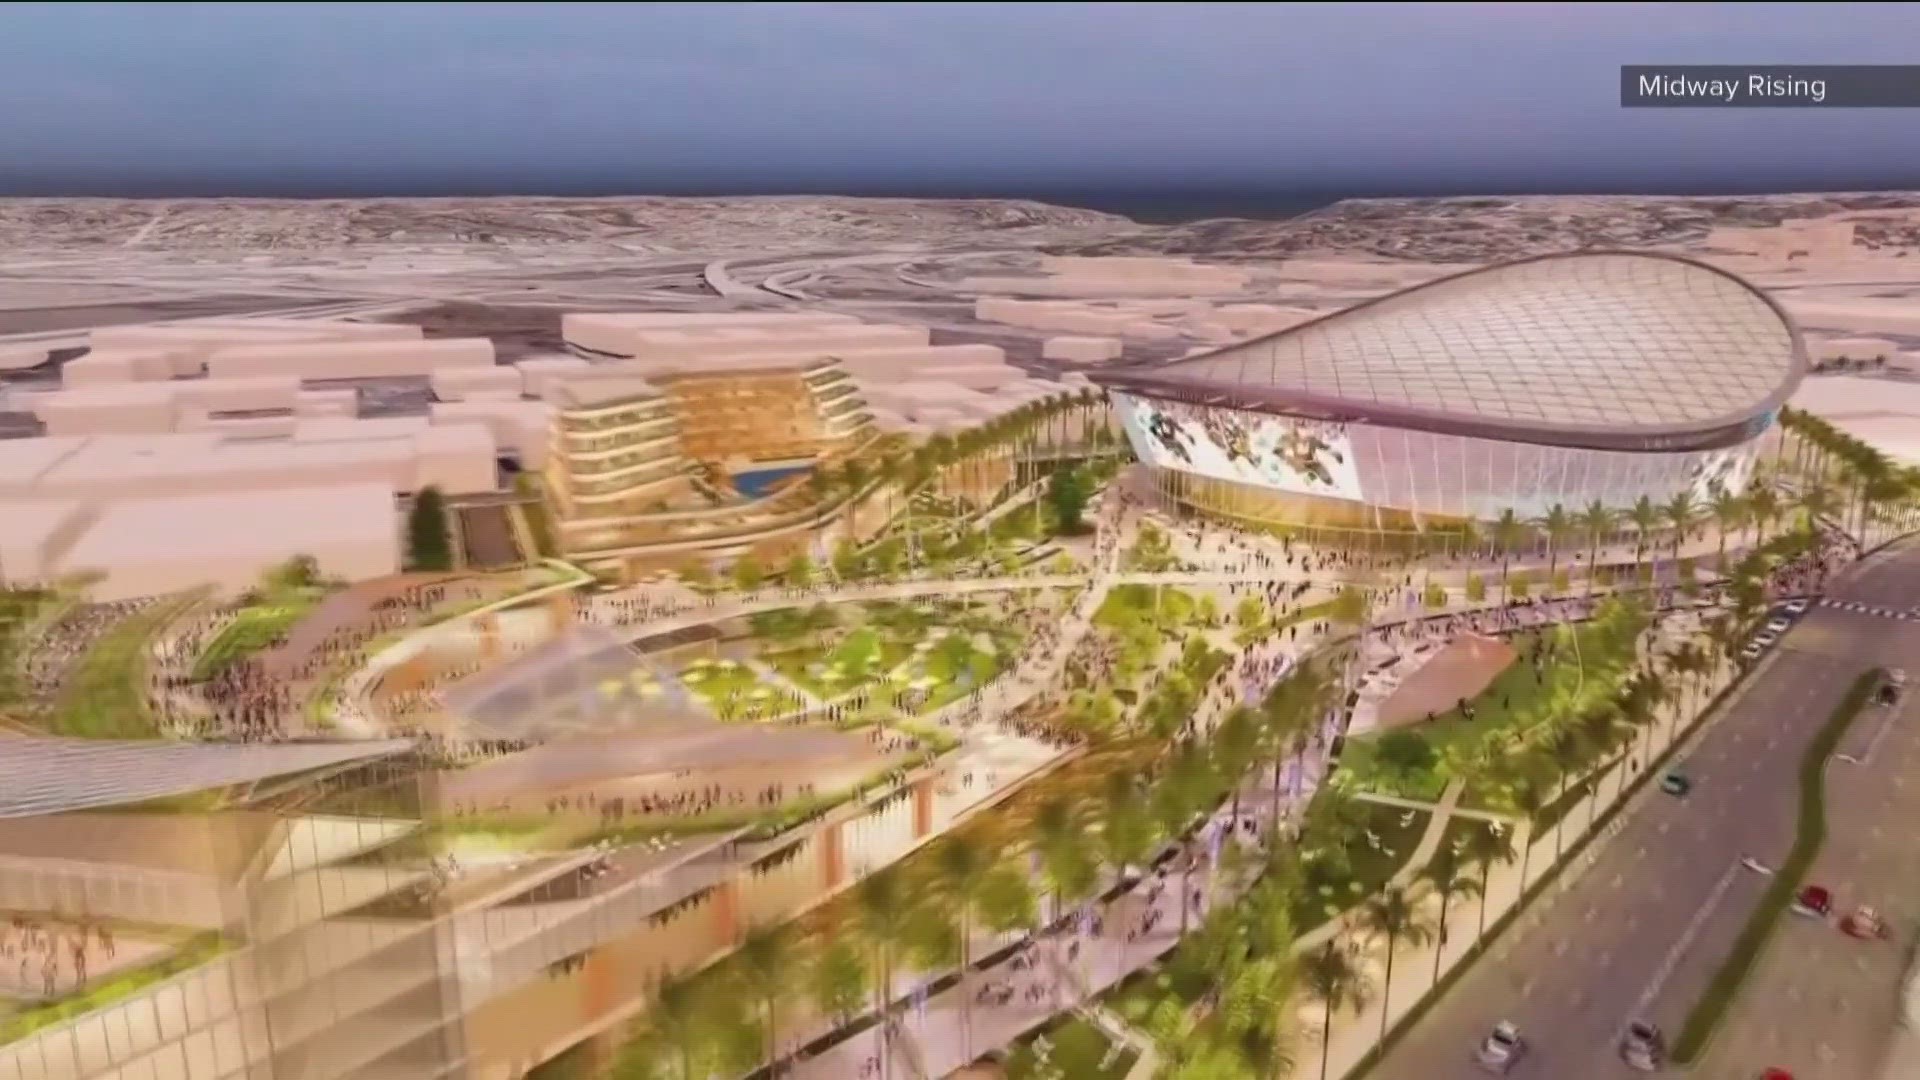 A plan to build a new arena and thousands of housing units in the Sports Arena area is getting mixed reviews.